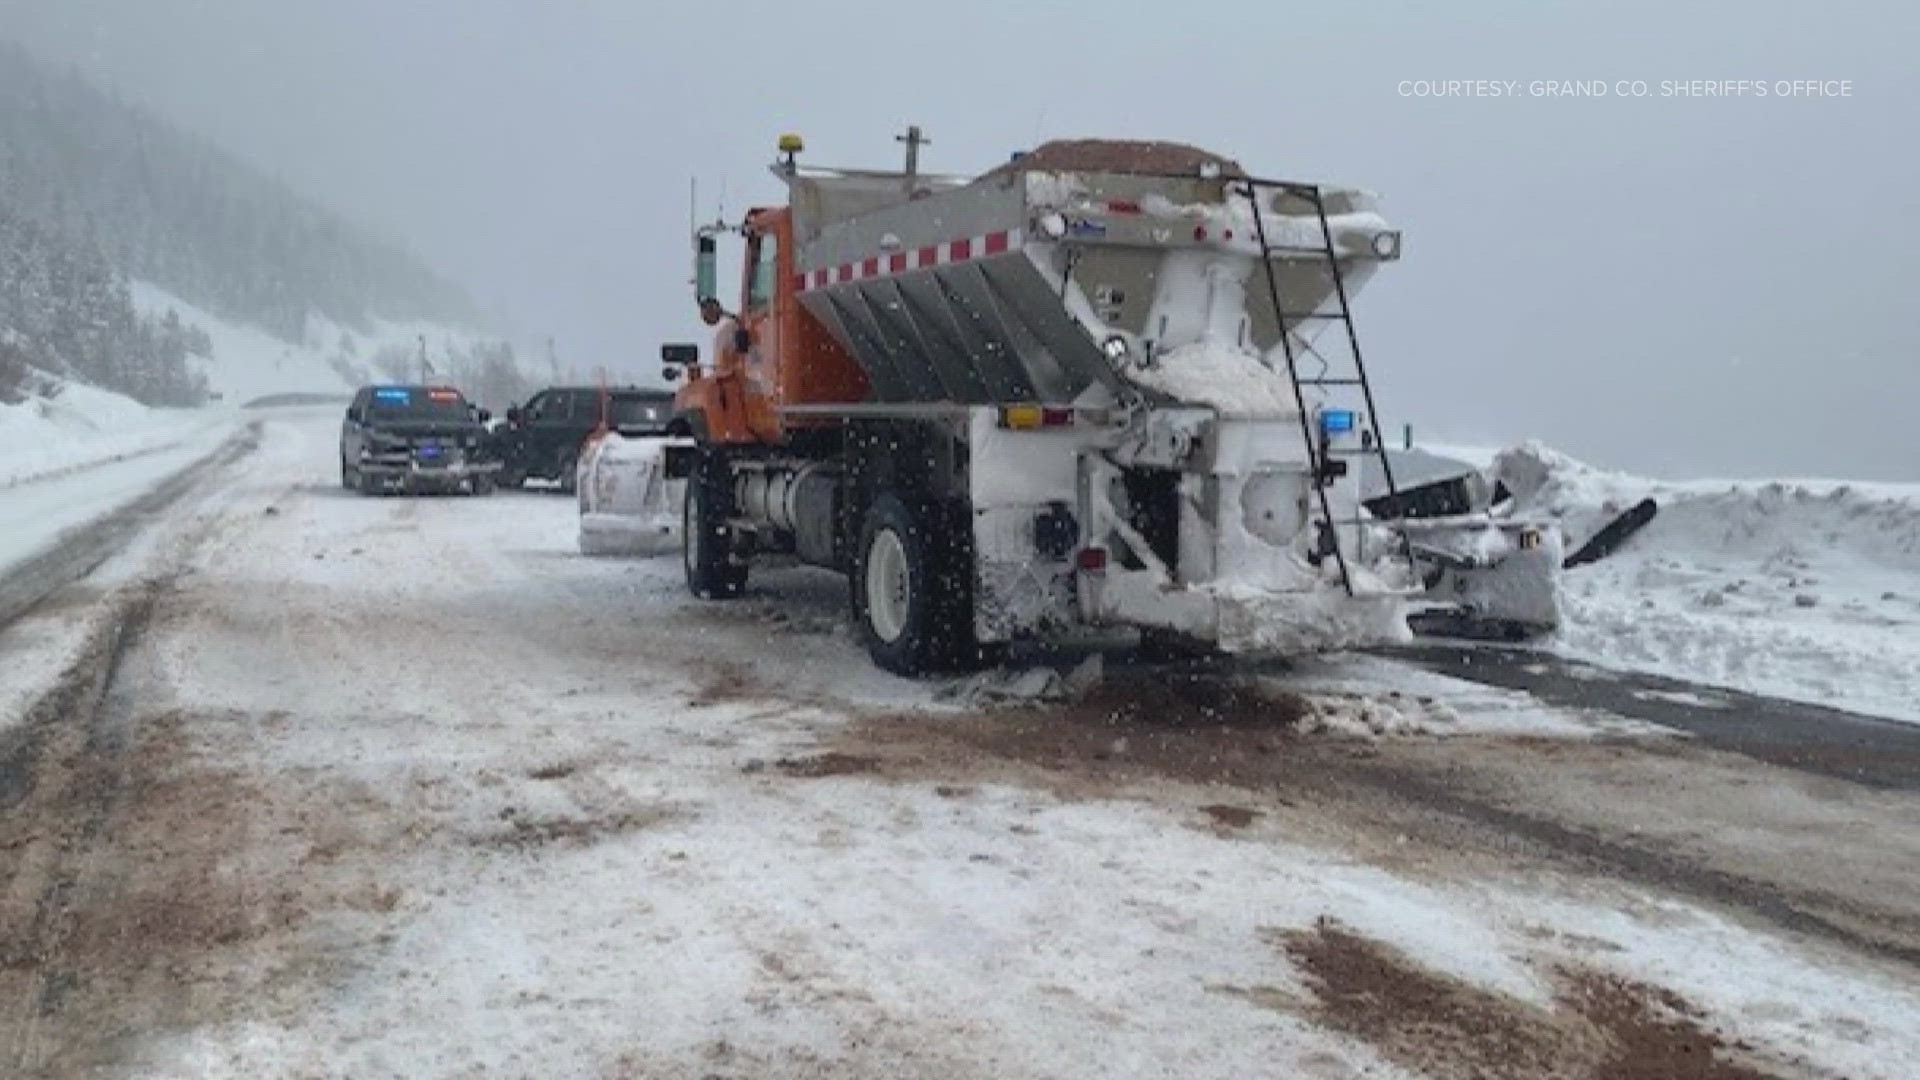 The Grand County Sheriff's Office said a CDOT plow driver blocked the suspect as he fled from law enforcement on Berthoud Pass Thursday.